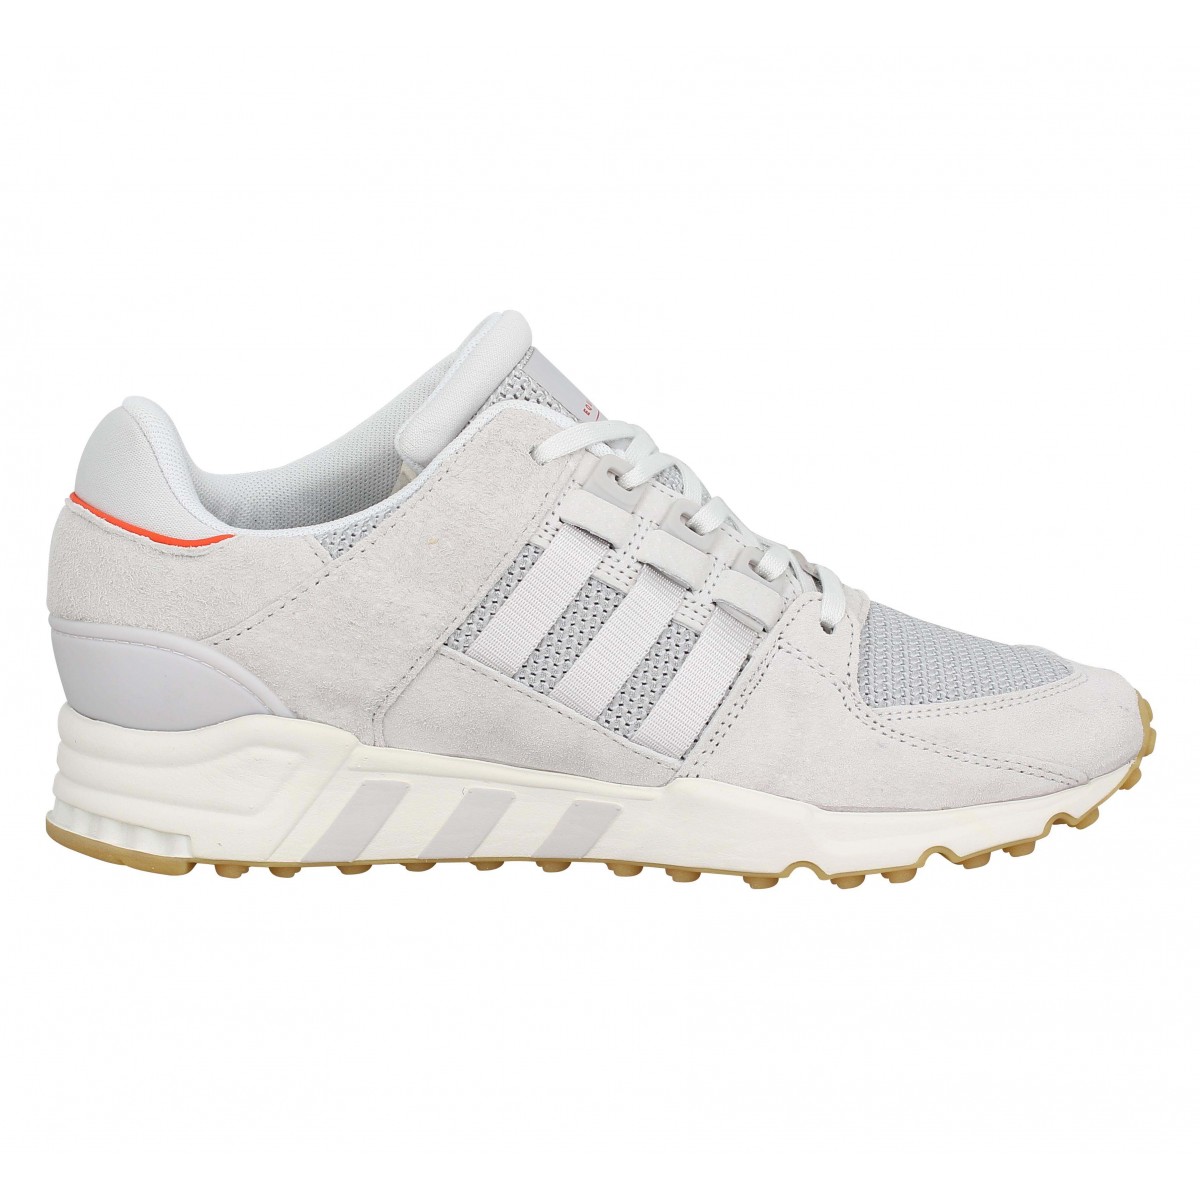 Chaussures Adidas eqt support rf toile homme gris homme | Fanny 